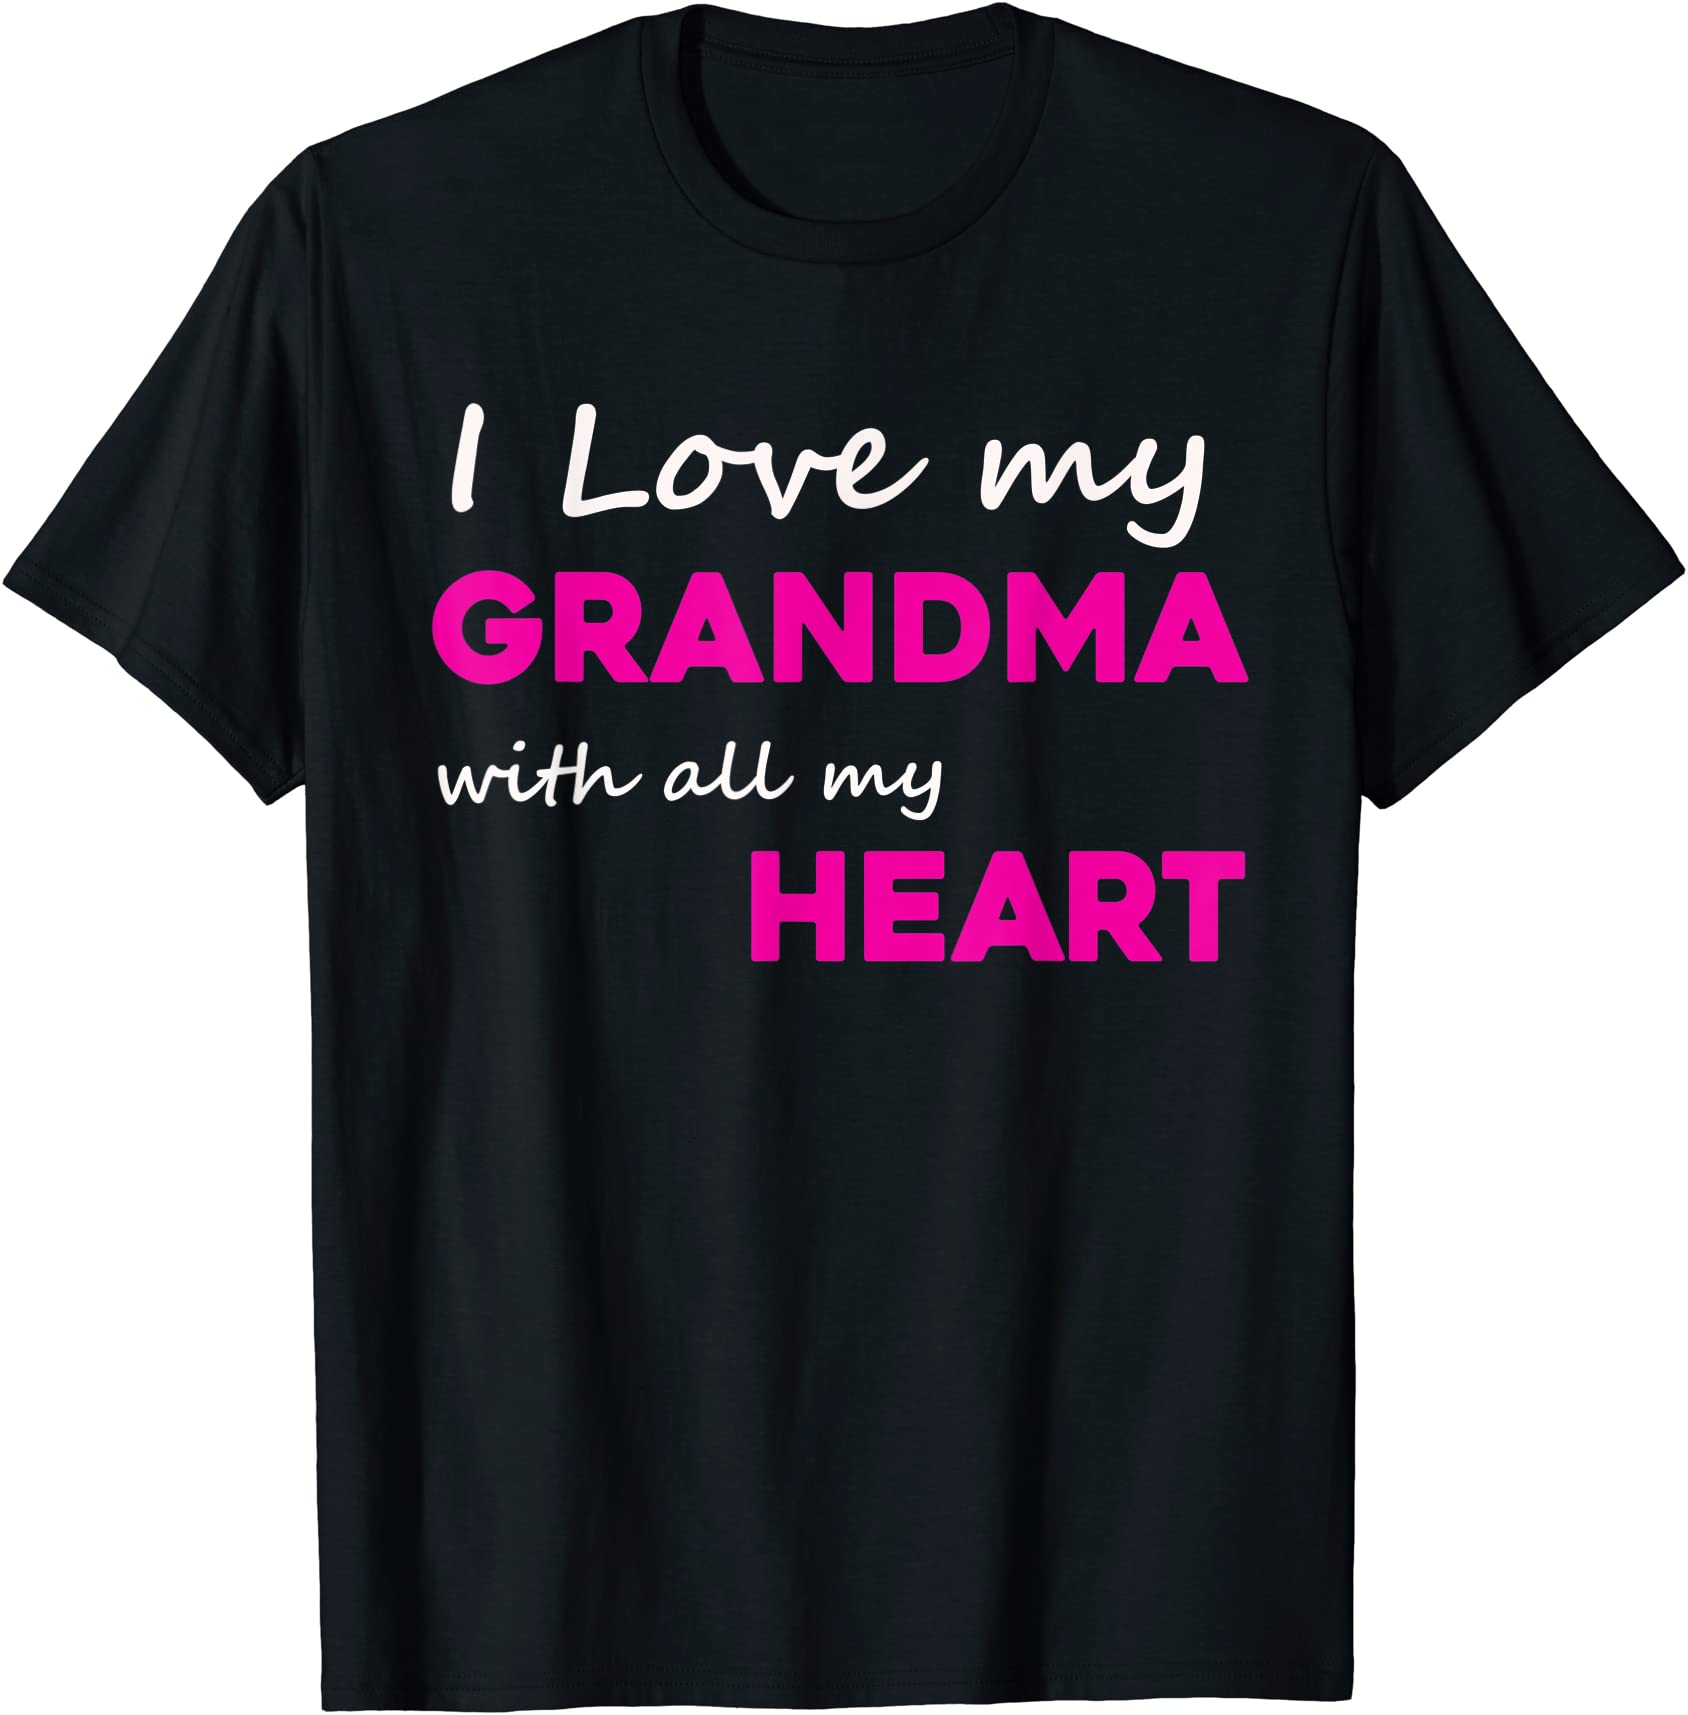 i love my grandma with all my heart shirt lovely grandmother t shirt ...